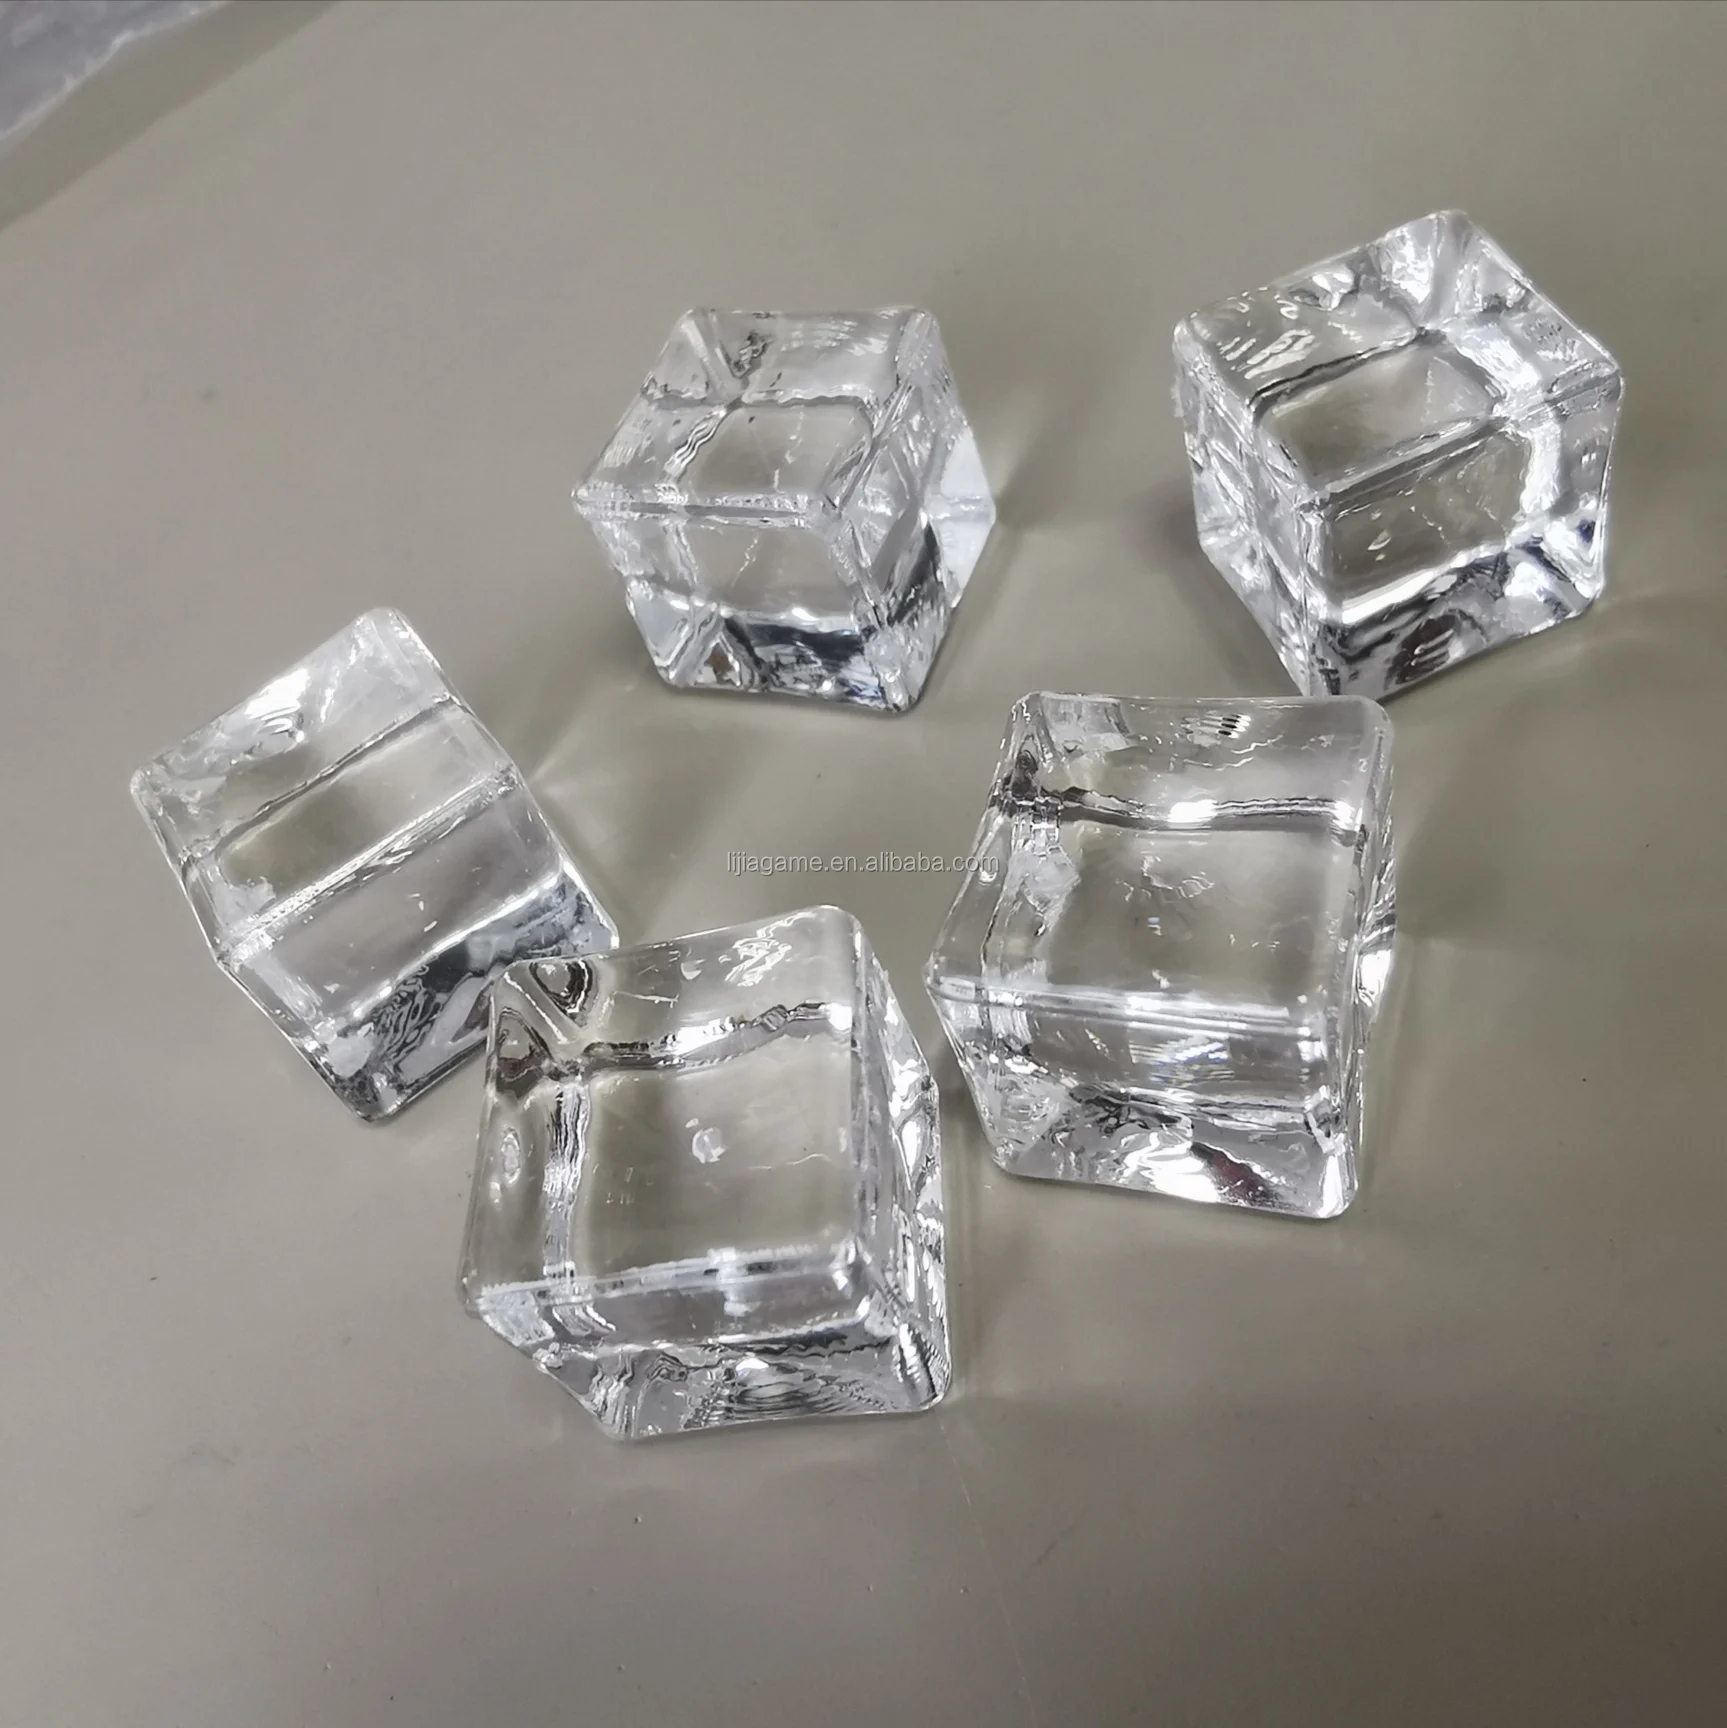 Customized Ice Cube Tokens For Board Games - Buy Customized Ice Cube ...